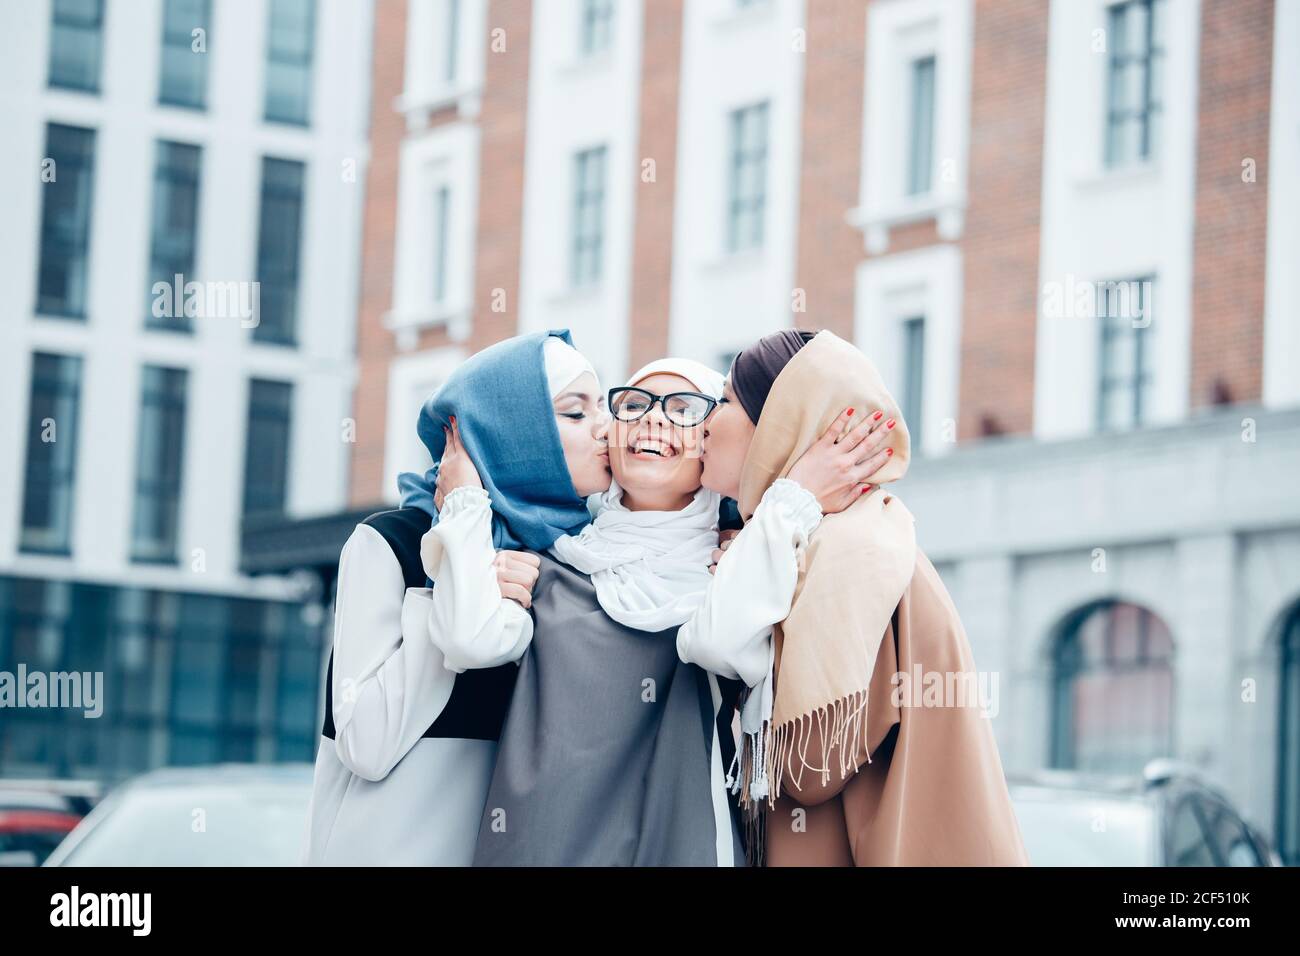 Two funny affectionate muslim women friends laughing and kissing girl in hijab an with glasses outdoors. Stock Photo